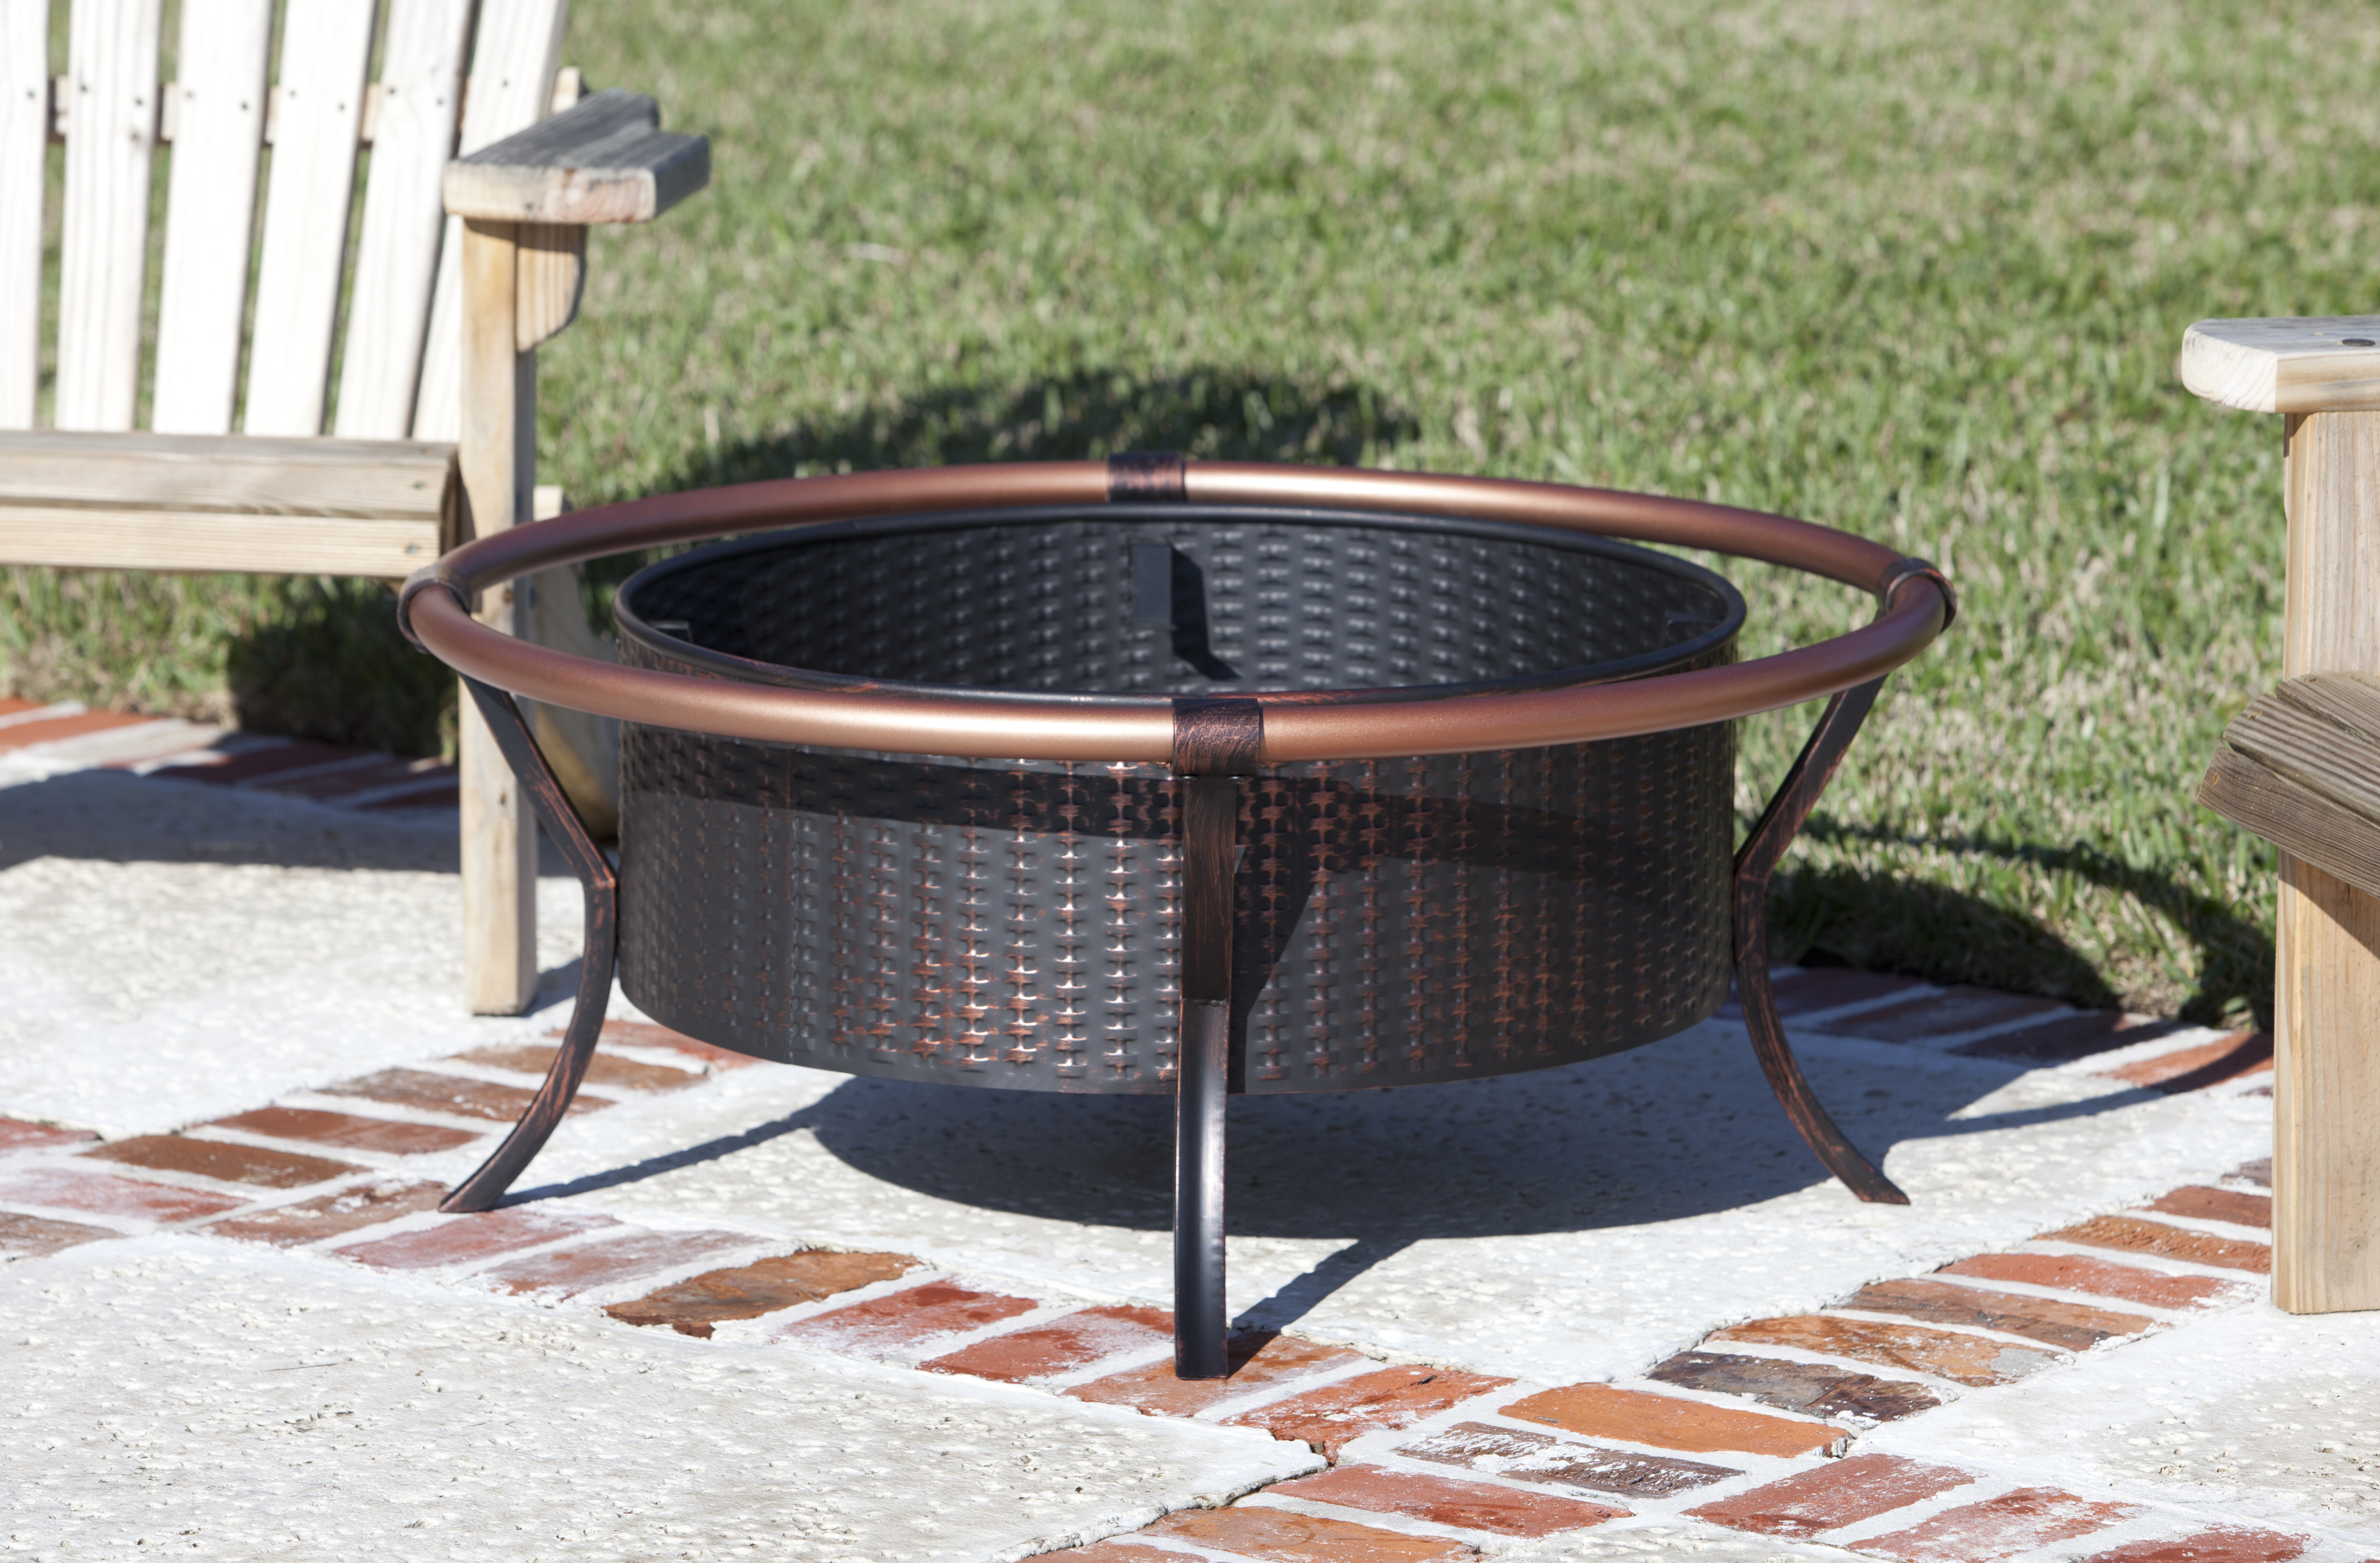 Fire pits at buc ees - ðŸ§¡ Cast Stone Wood Fire Pit Yard and landscaping Wo....